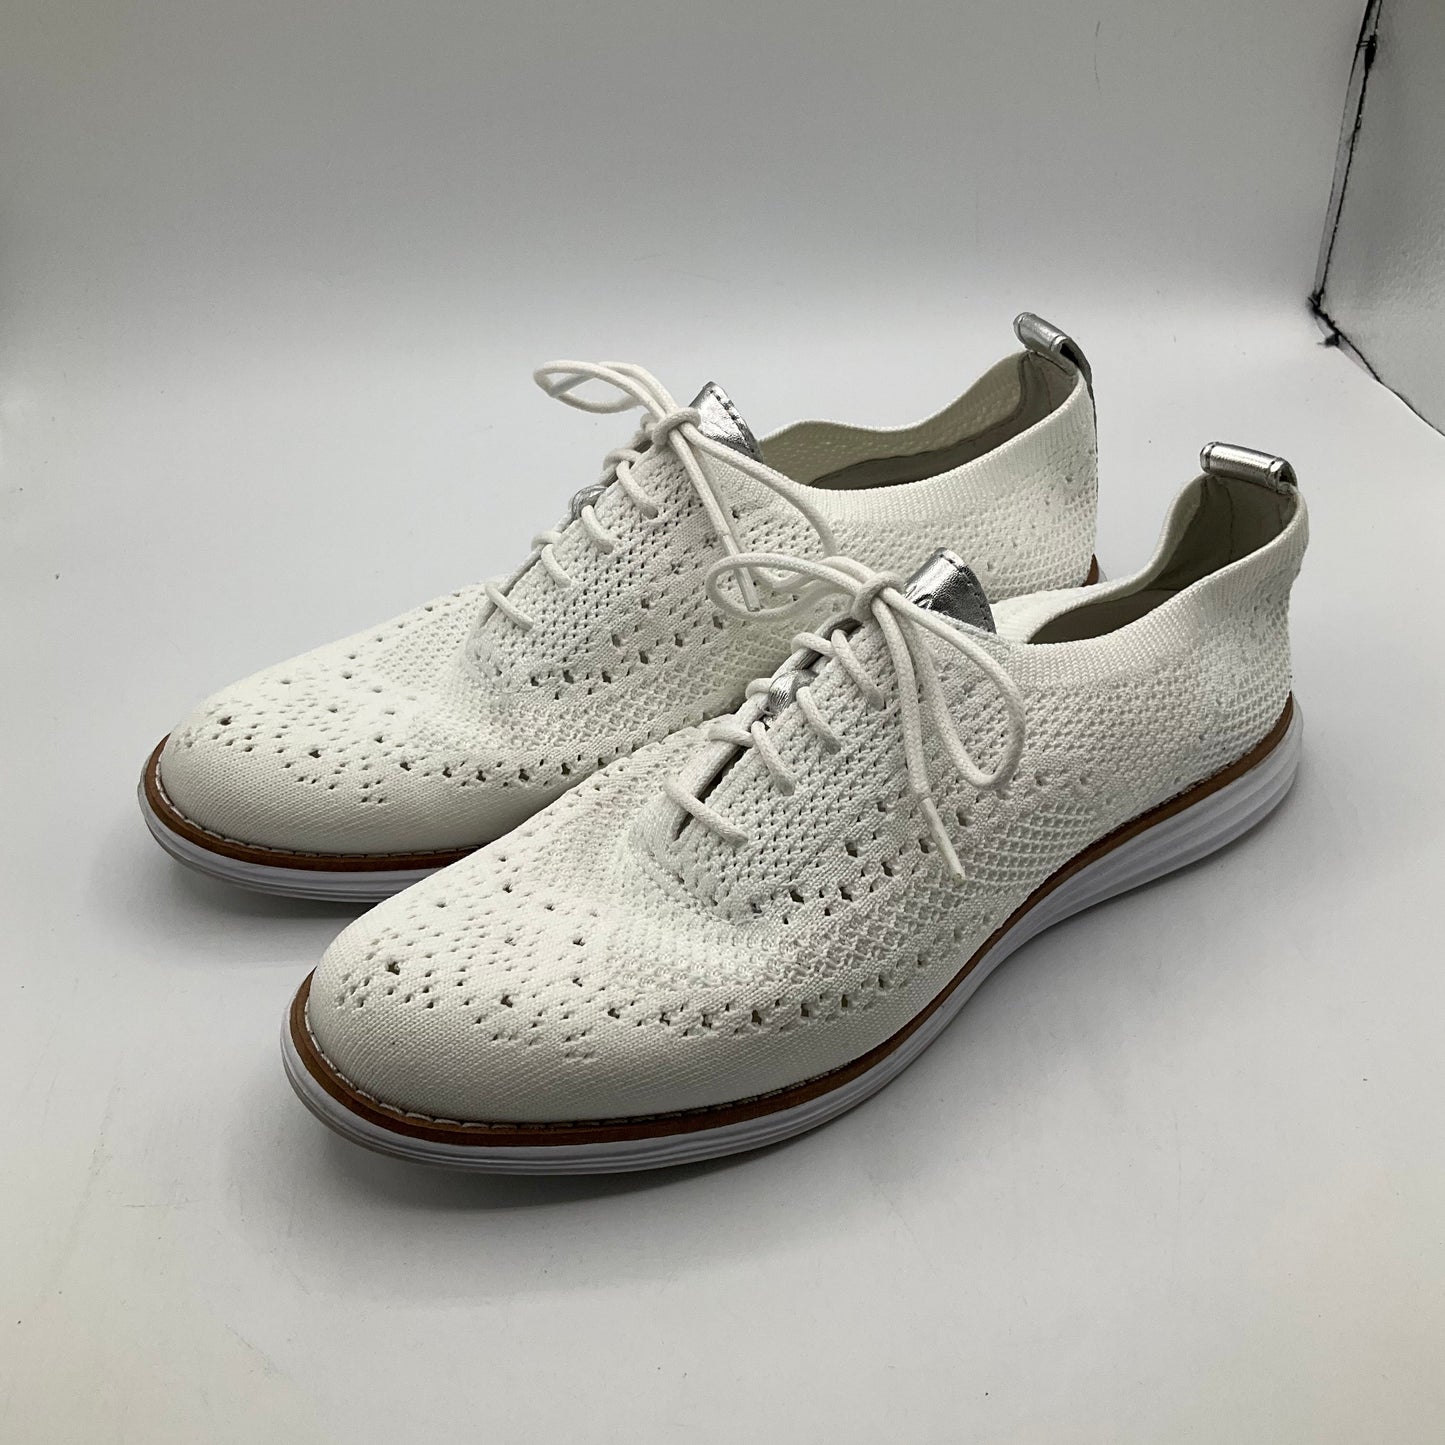 White Shoes Flats Cole-haan, Size 7.5